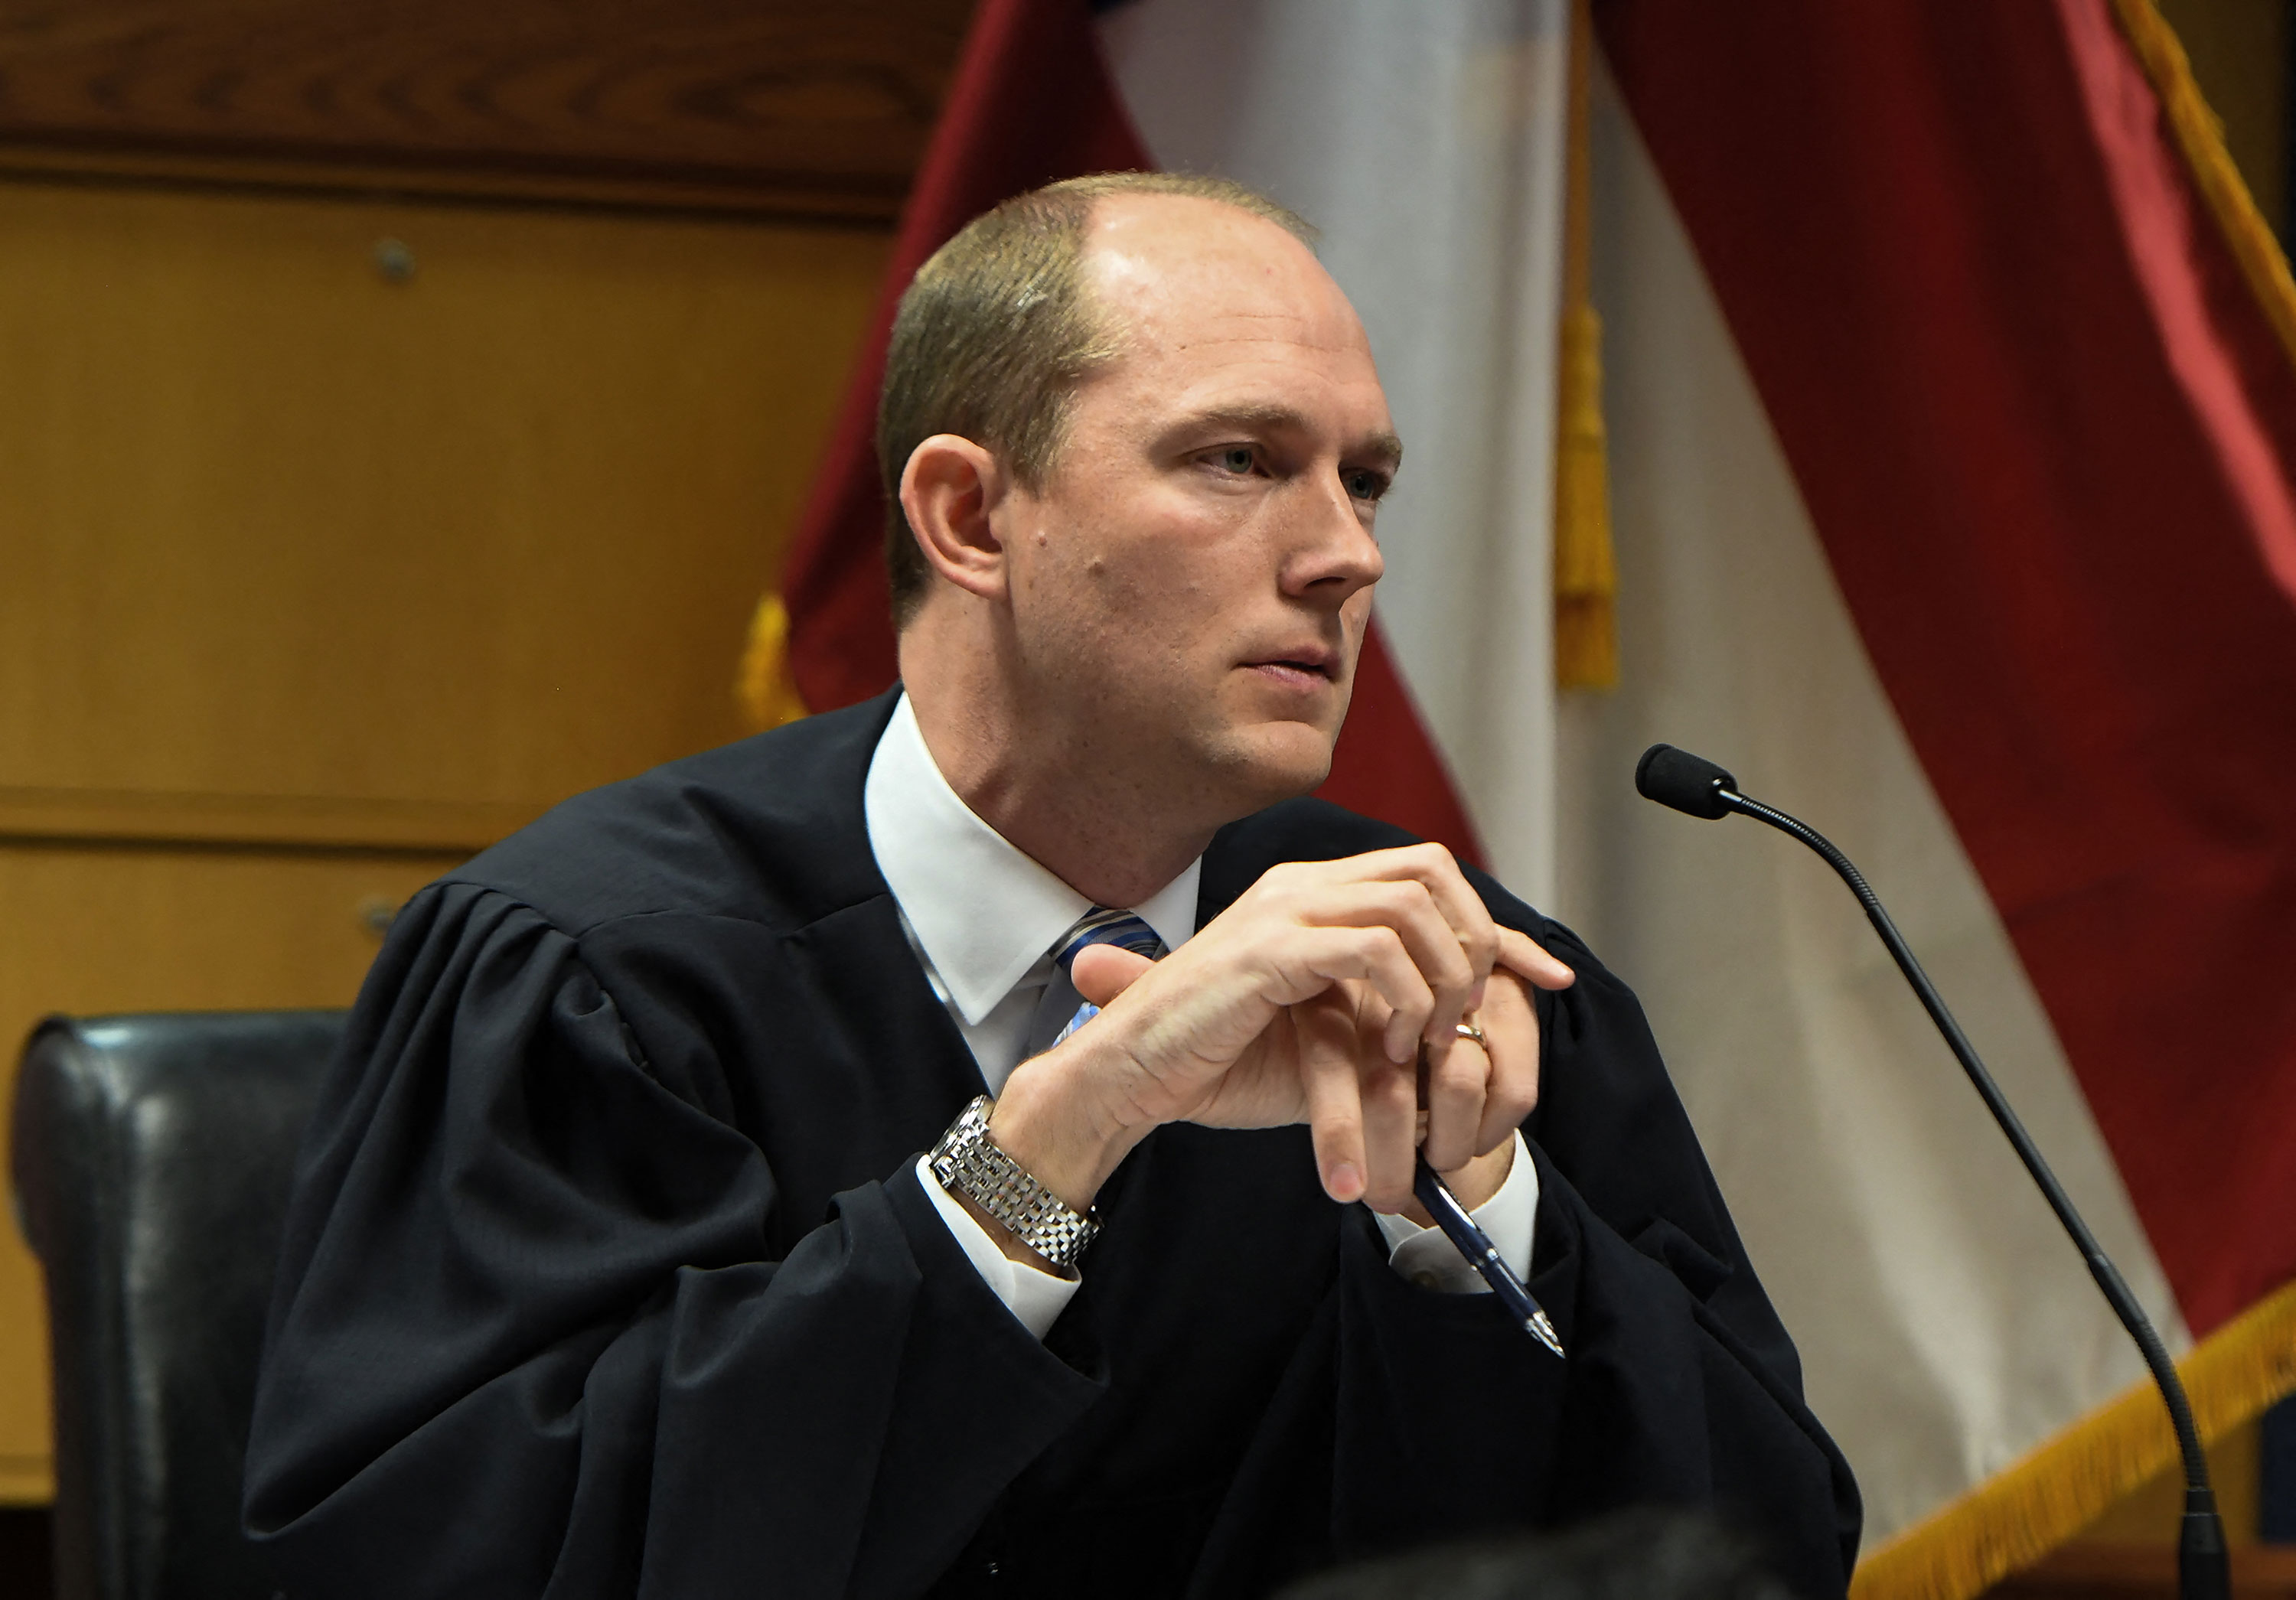 Fulton County Superior Judge Scott McAfee presides over the hearing at the Fulton County Courthouse in Atlanta on Thursday.